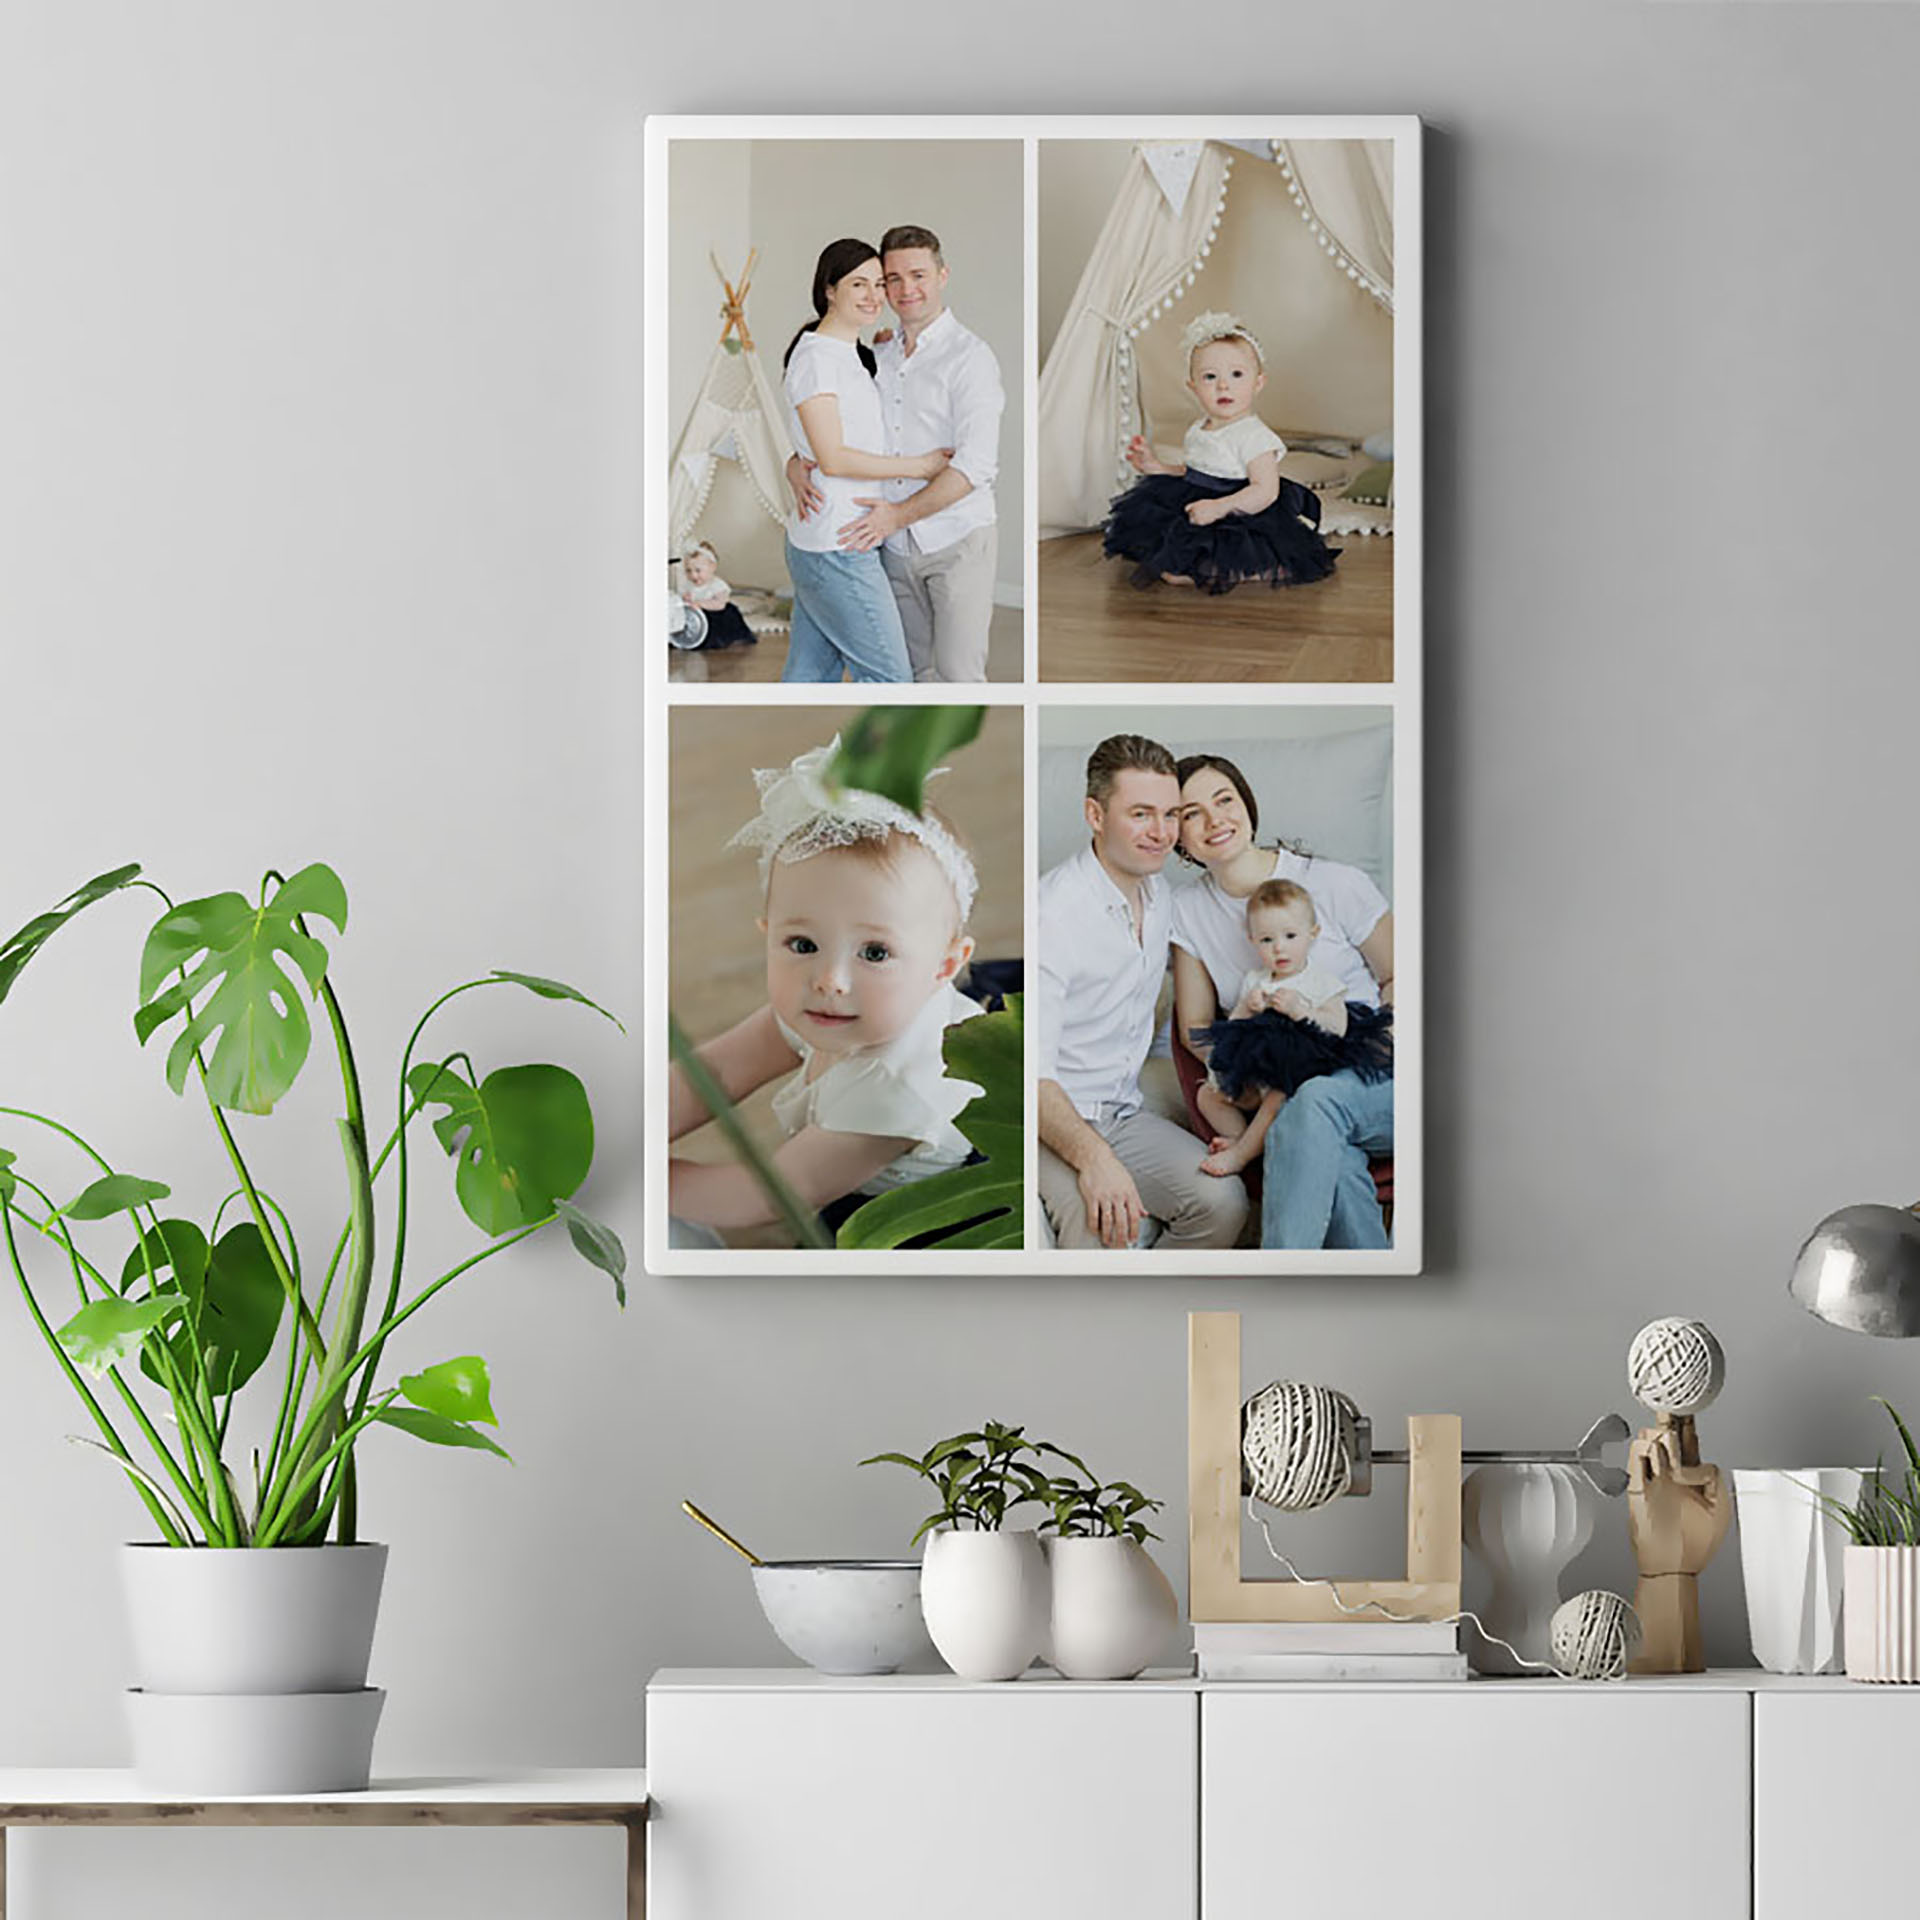 Display your family photos